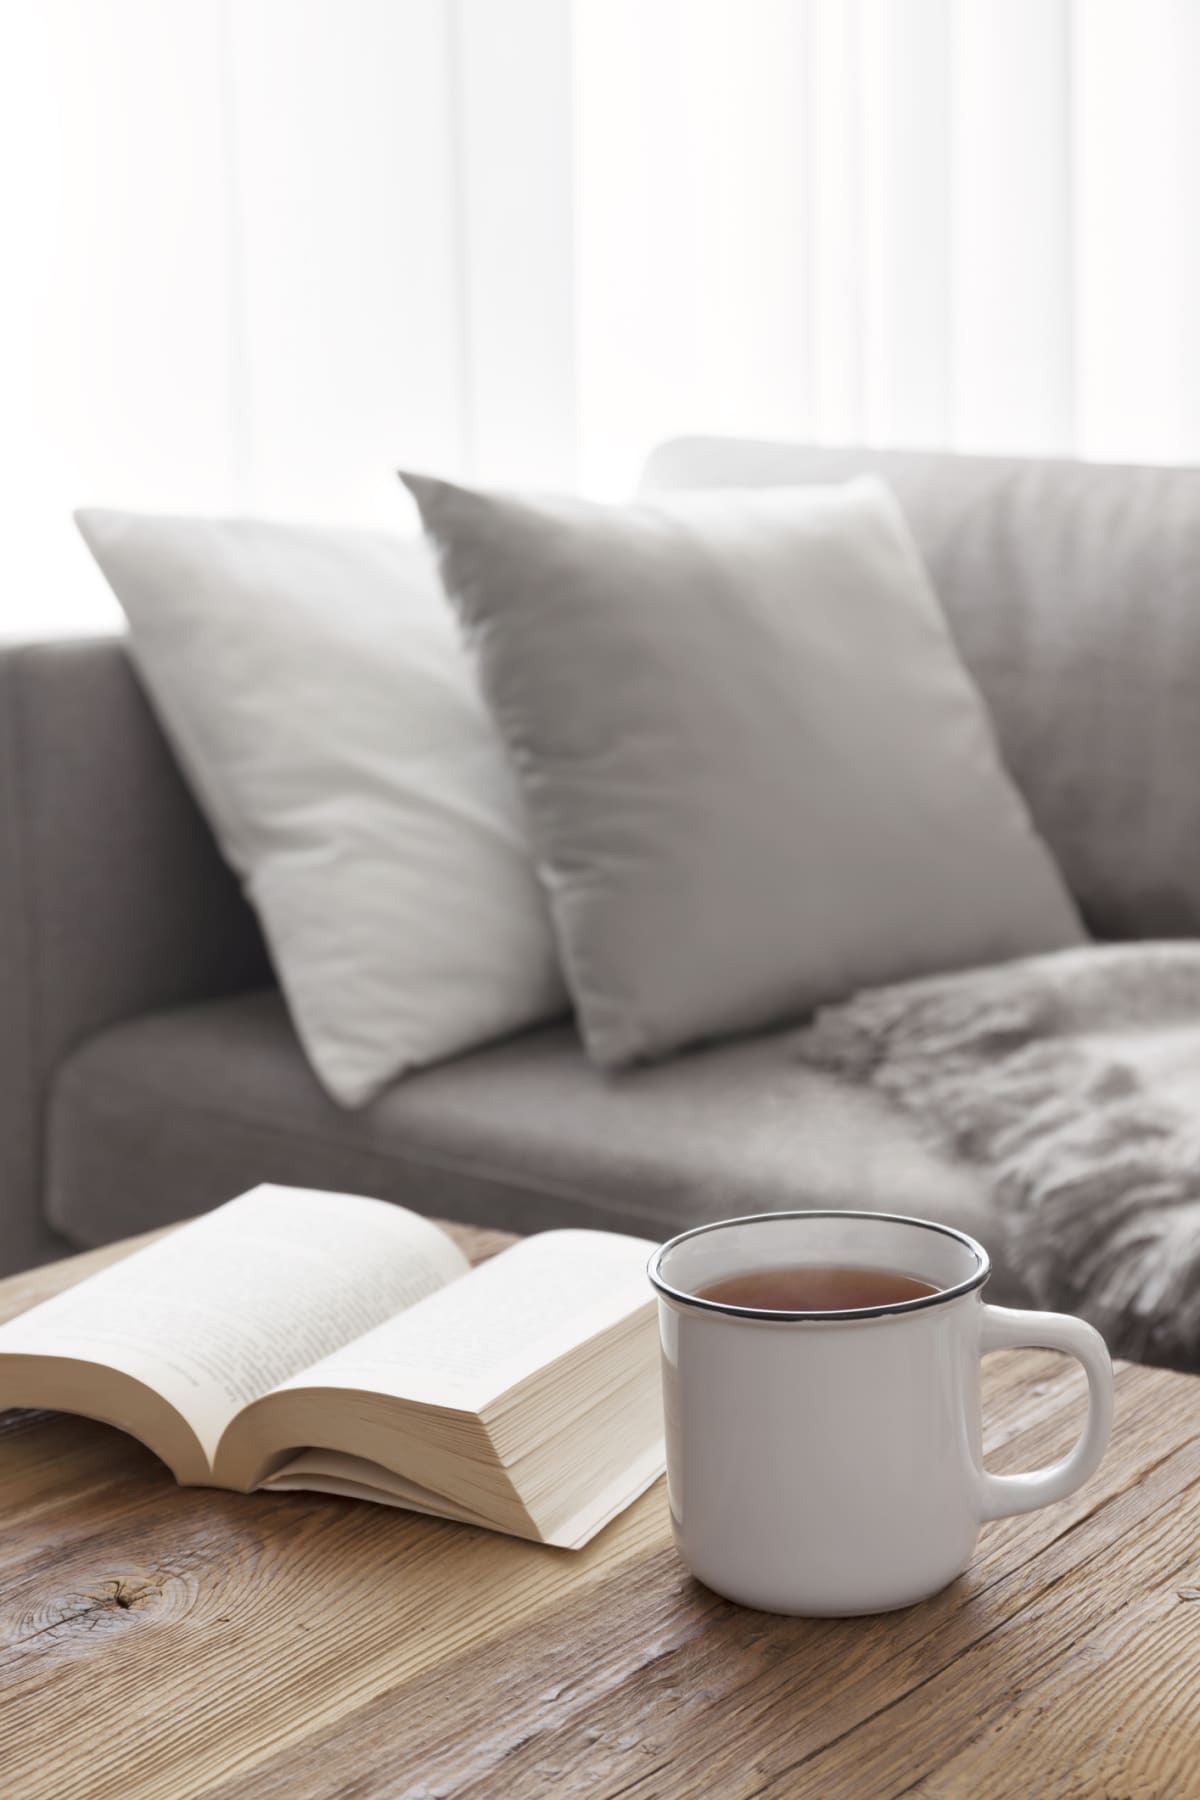 Cozy afternoon reading on the sofa with a steaming cup of tea